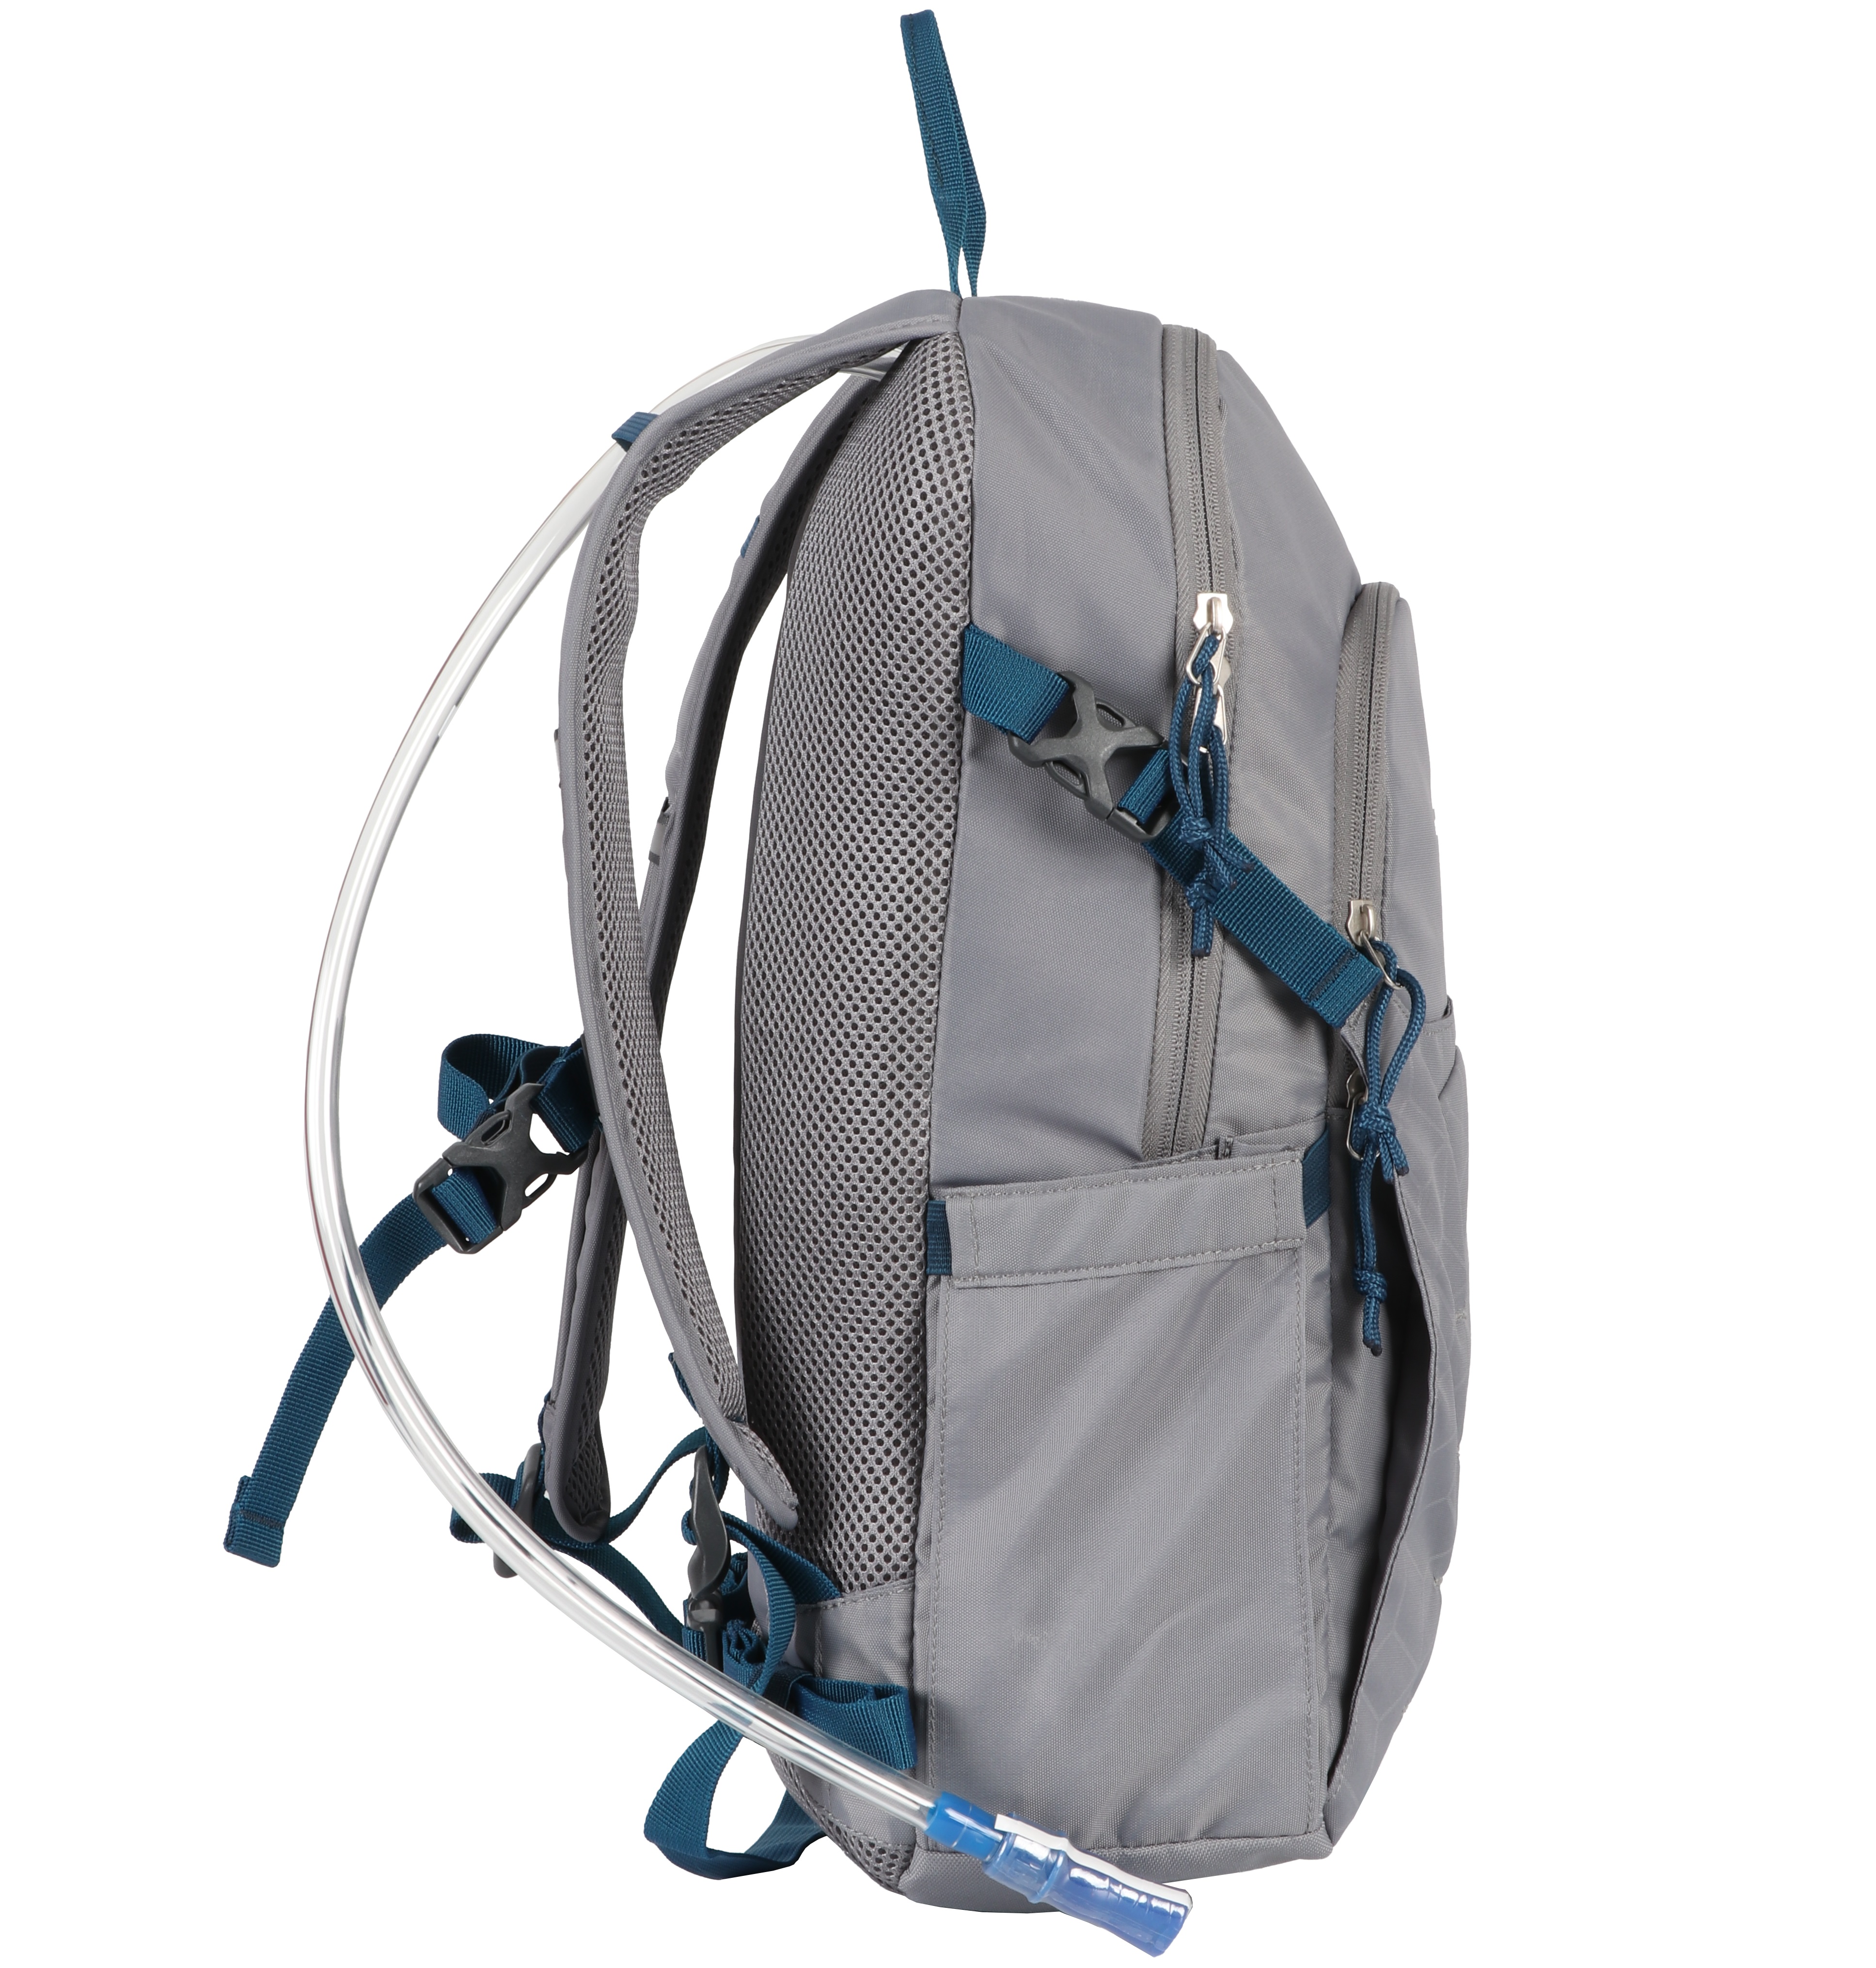 Ozark Trail 14 Ltr Hydration Pack, with Water Reservoir, Grey Polyester - image 4 of 10